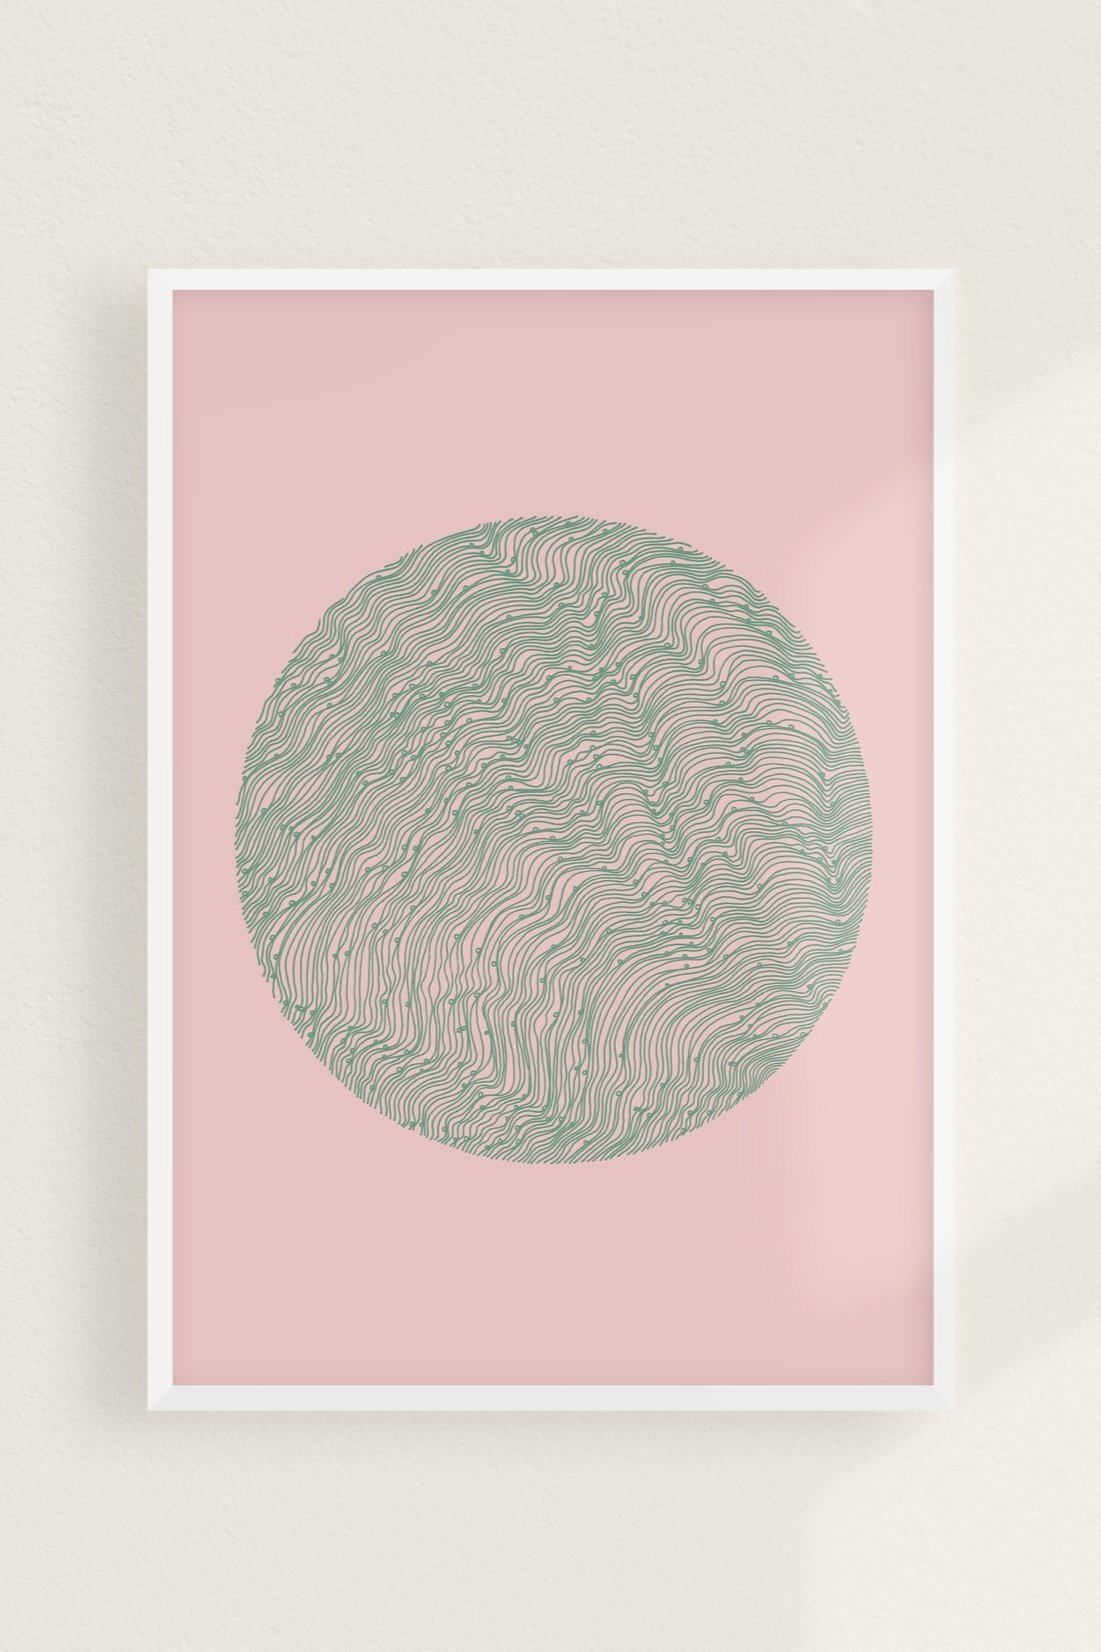  Circle, art print, print, pink green, pink and green, green and pink, mid century modern, illustration, etsy, etsy shop, illustration, art, wall art, home décor, design, design and illustration, illustrator, chd, claire heffer design, ch design, fil